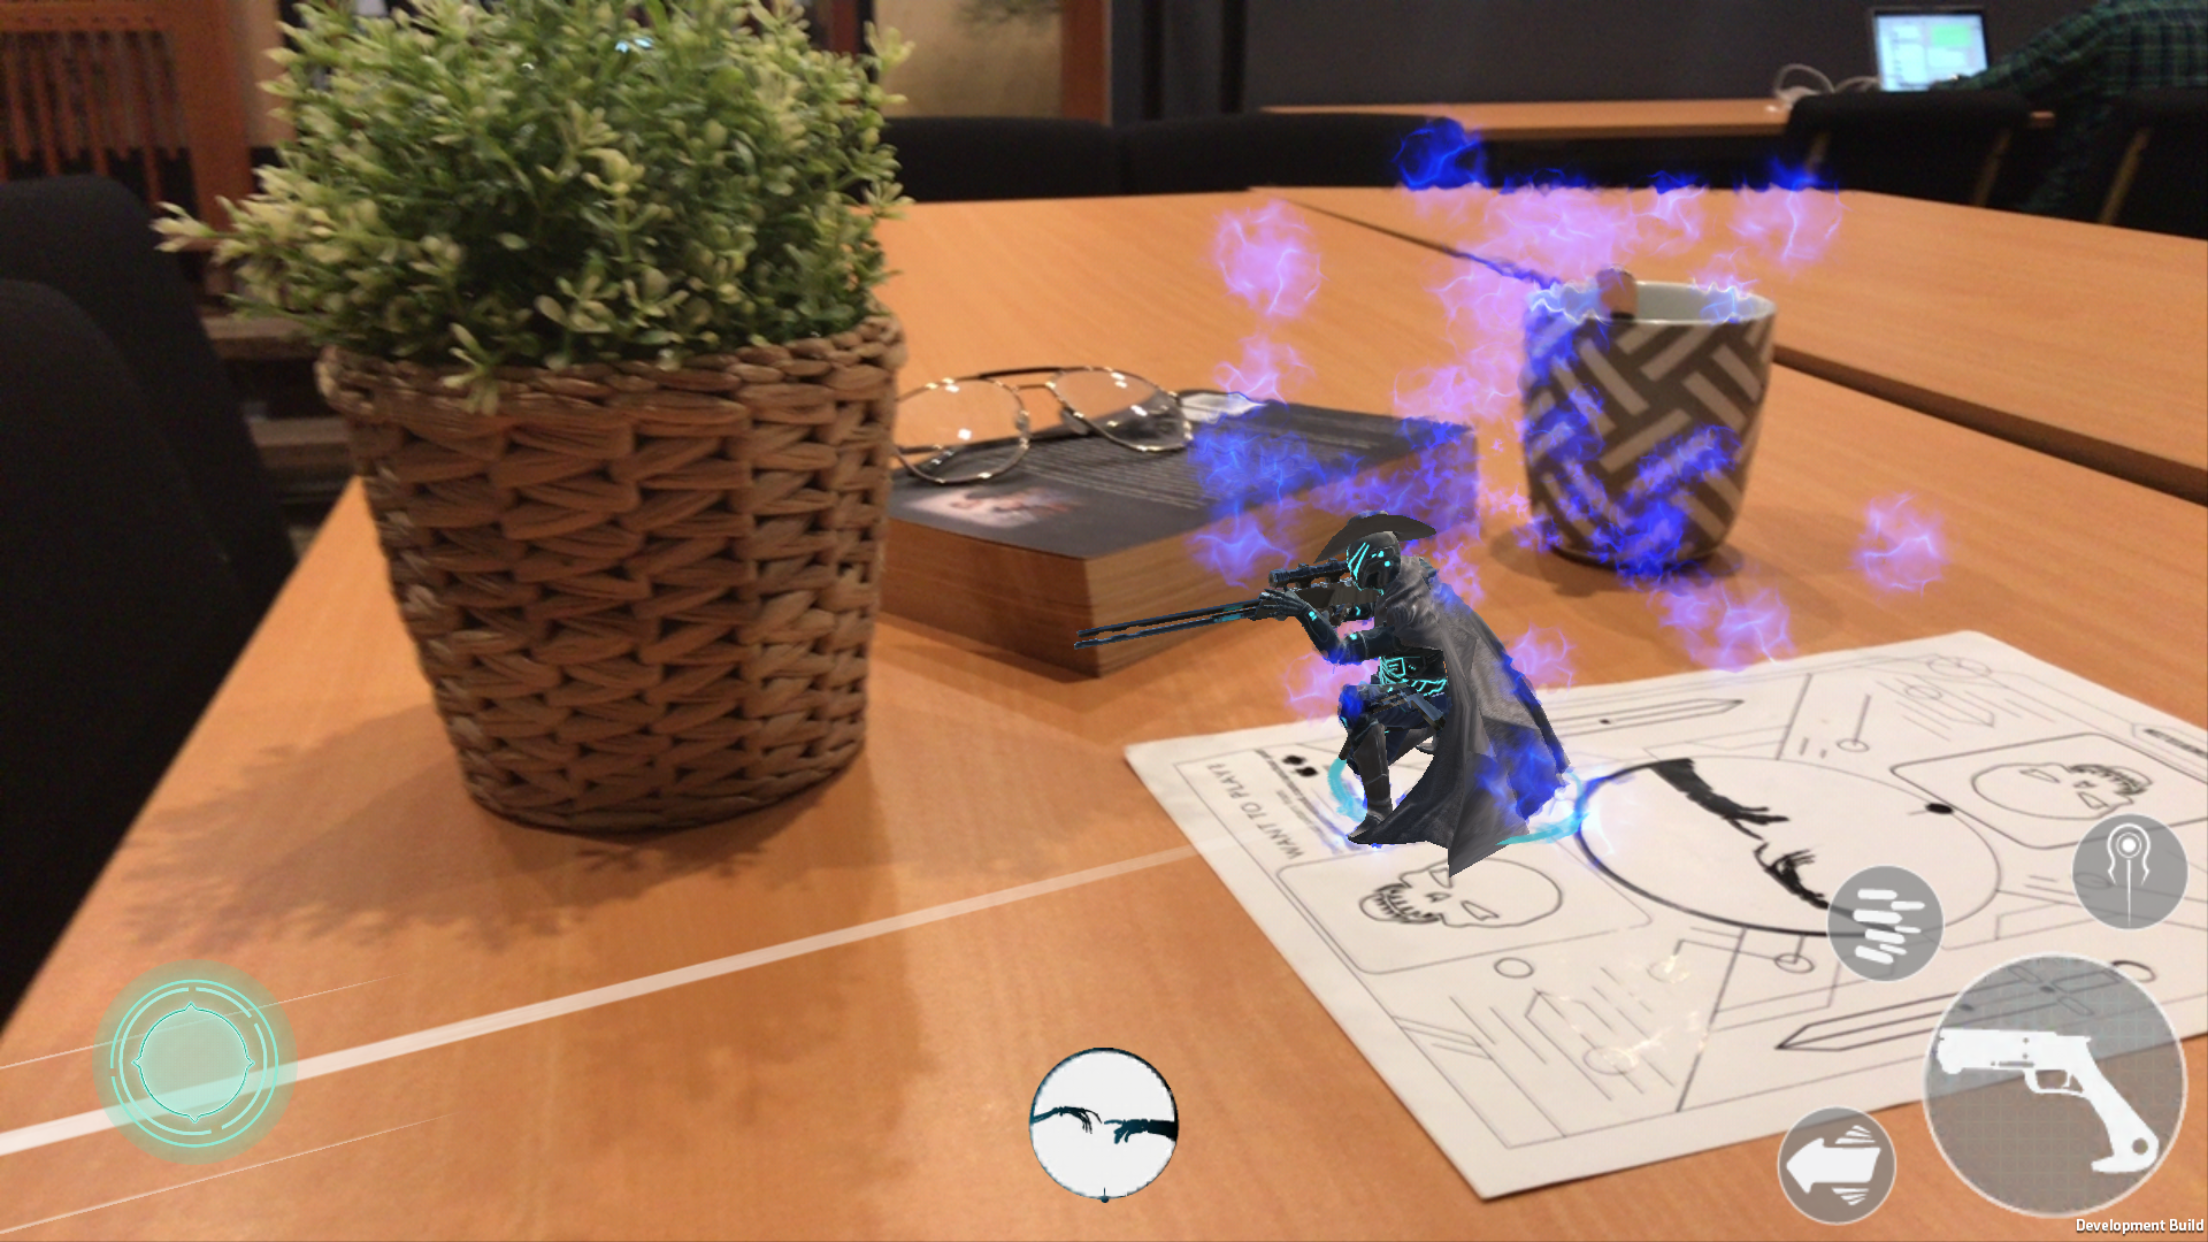 Genesis Augmented Reality playable character called Osirus in Augmented Reality shooting a laser sniper rifle